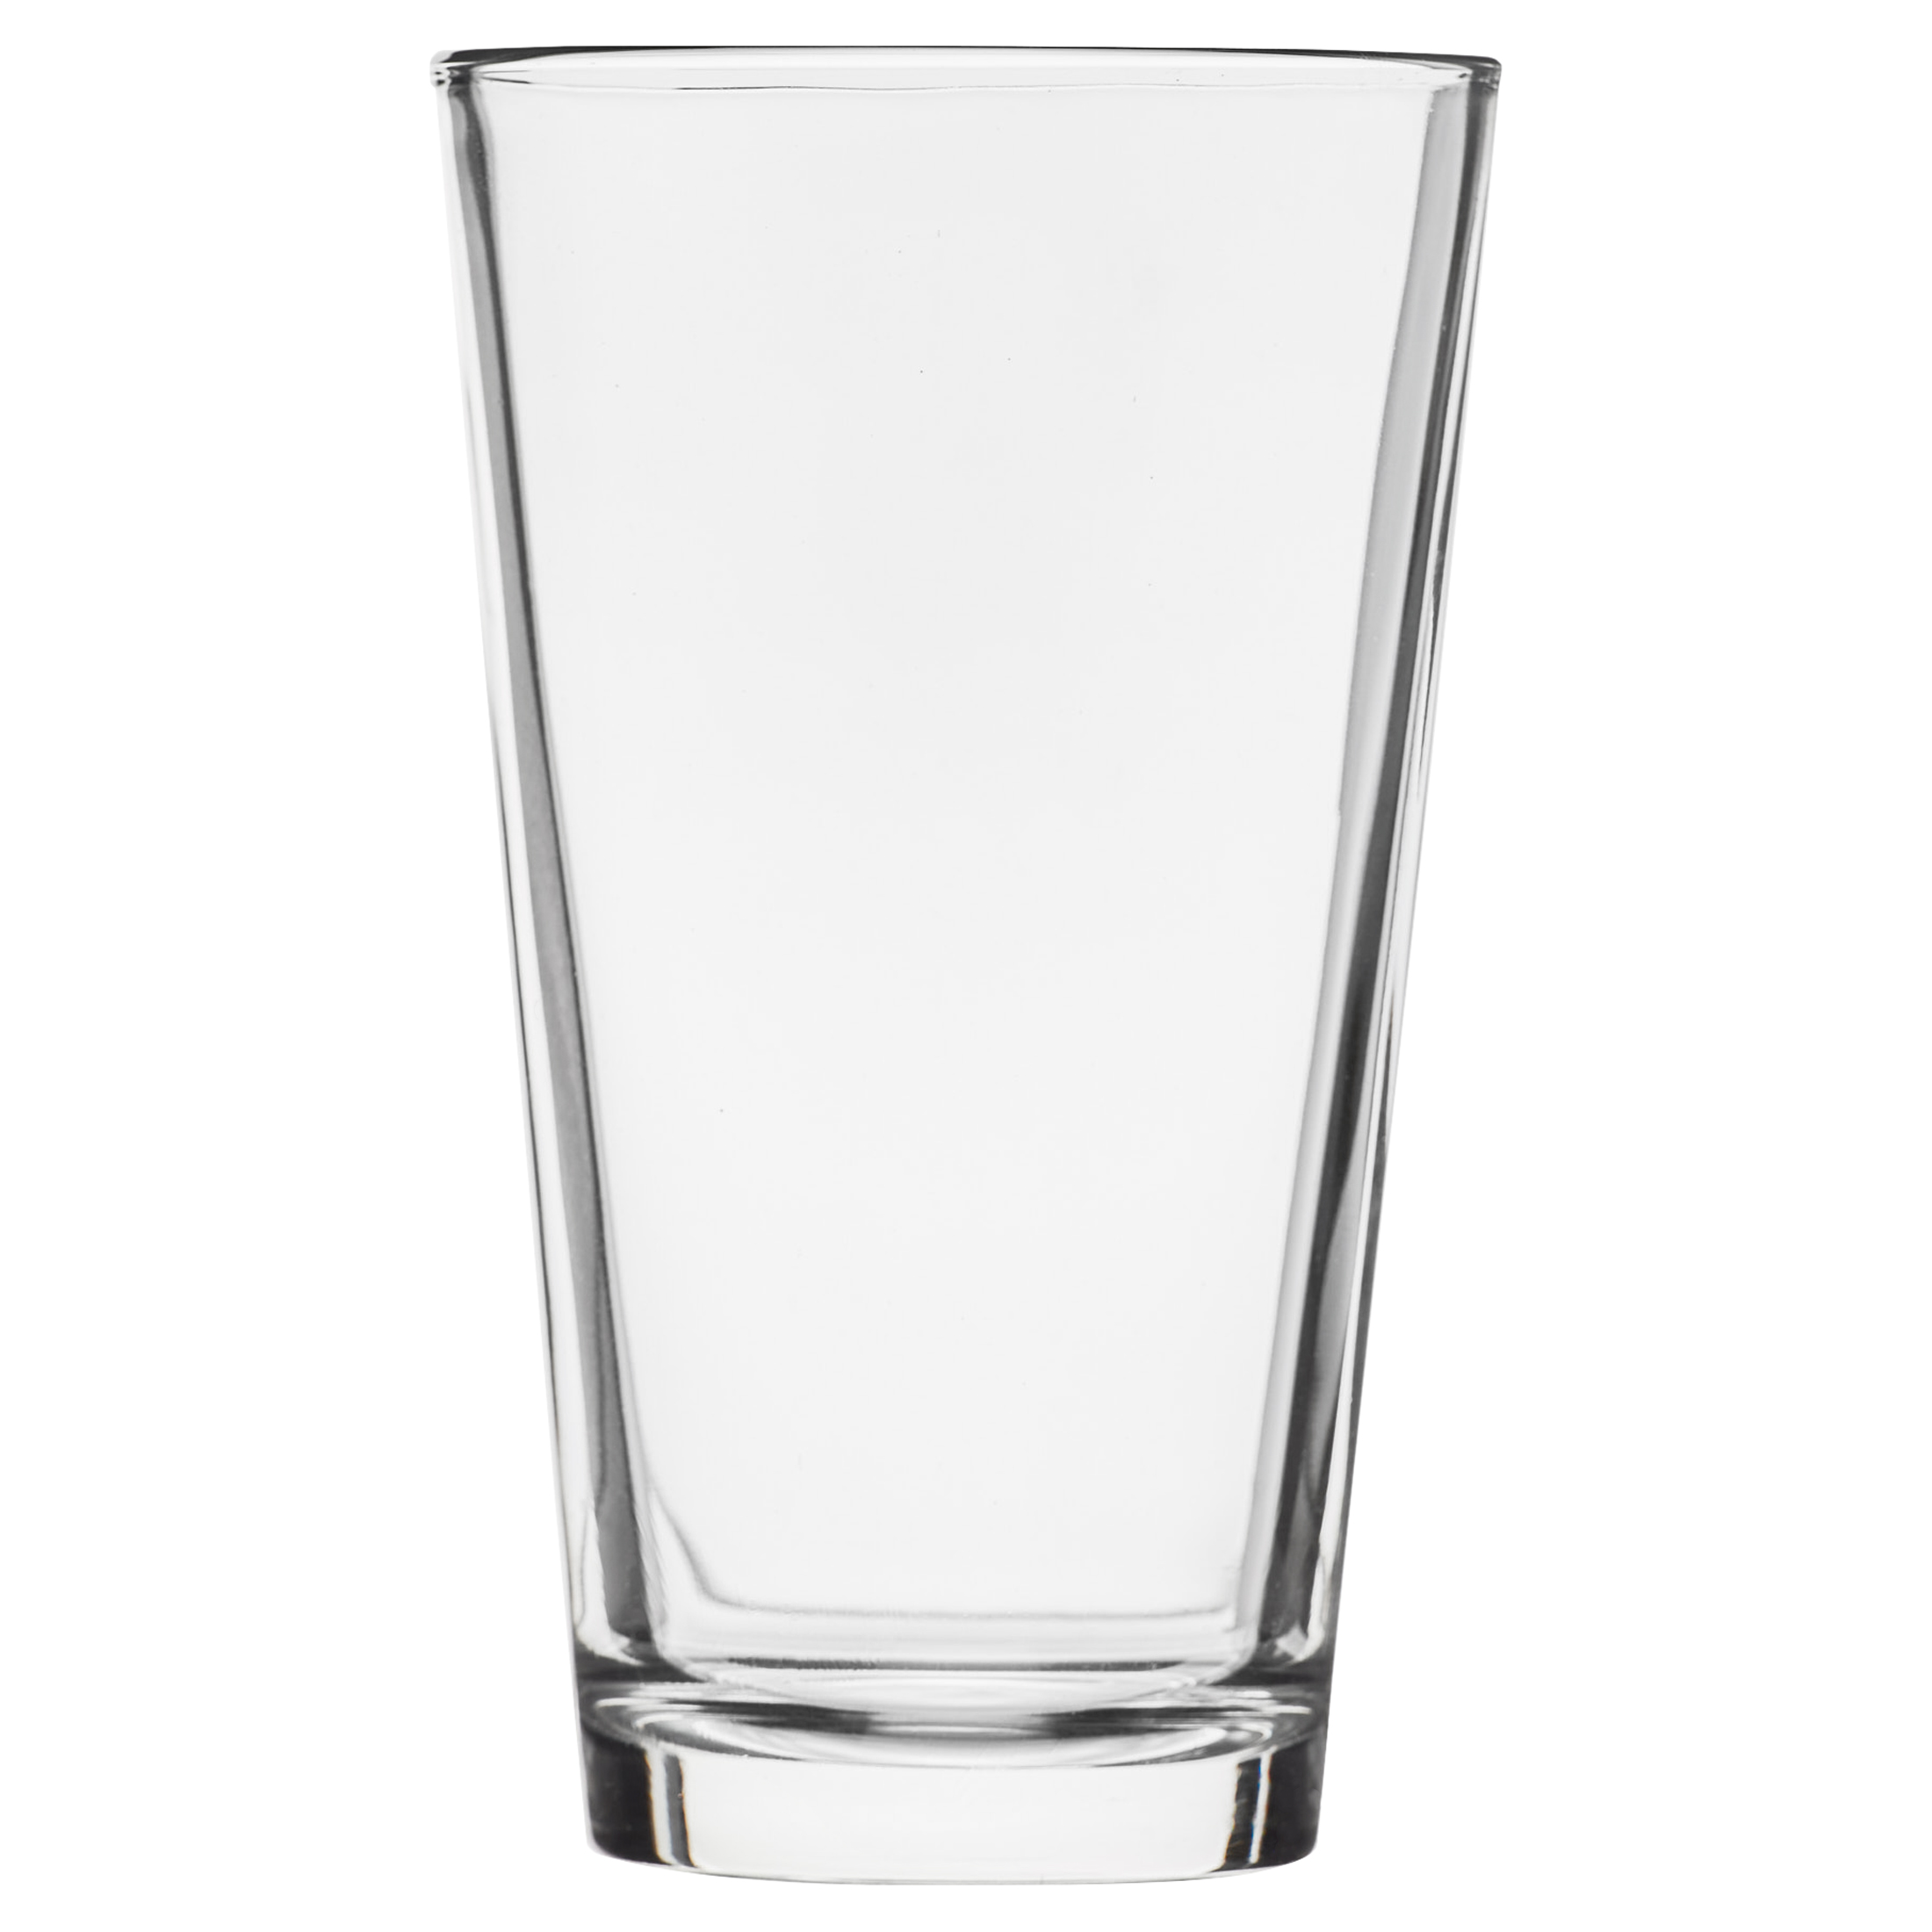 Mainstays 16-Ounce All-Purpose Cooler Glasses, Set of 12 - image 1 of 4